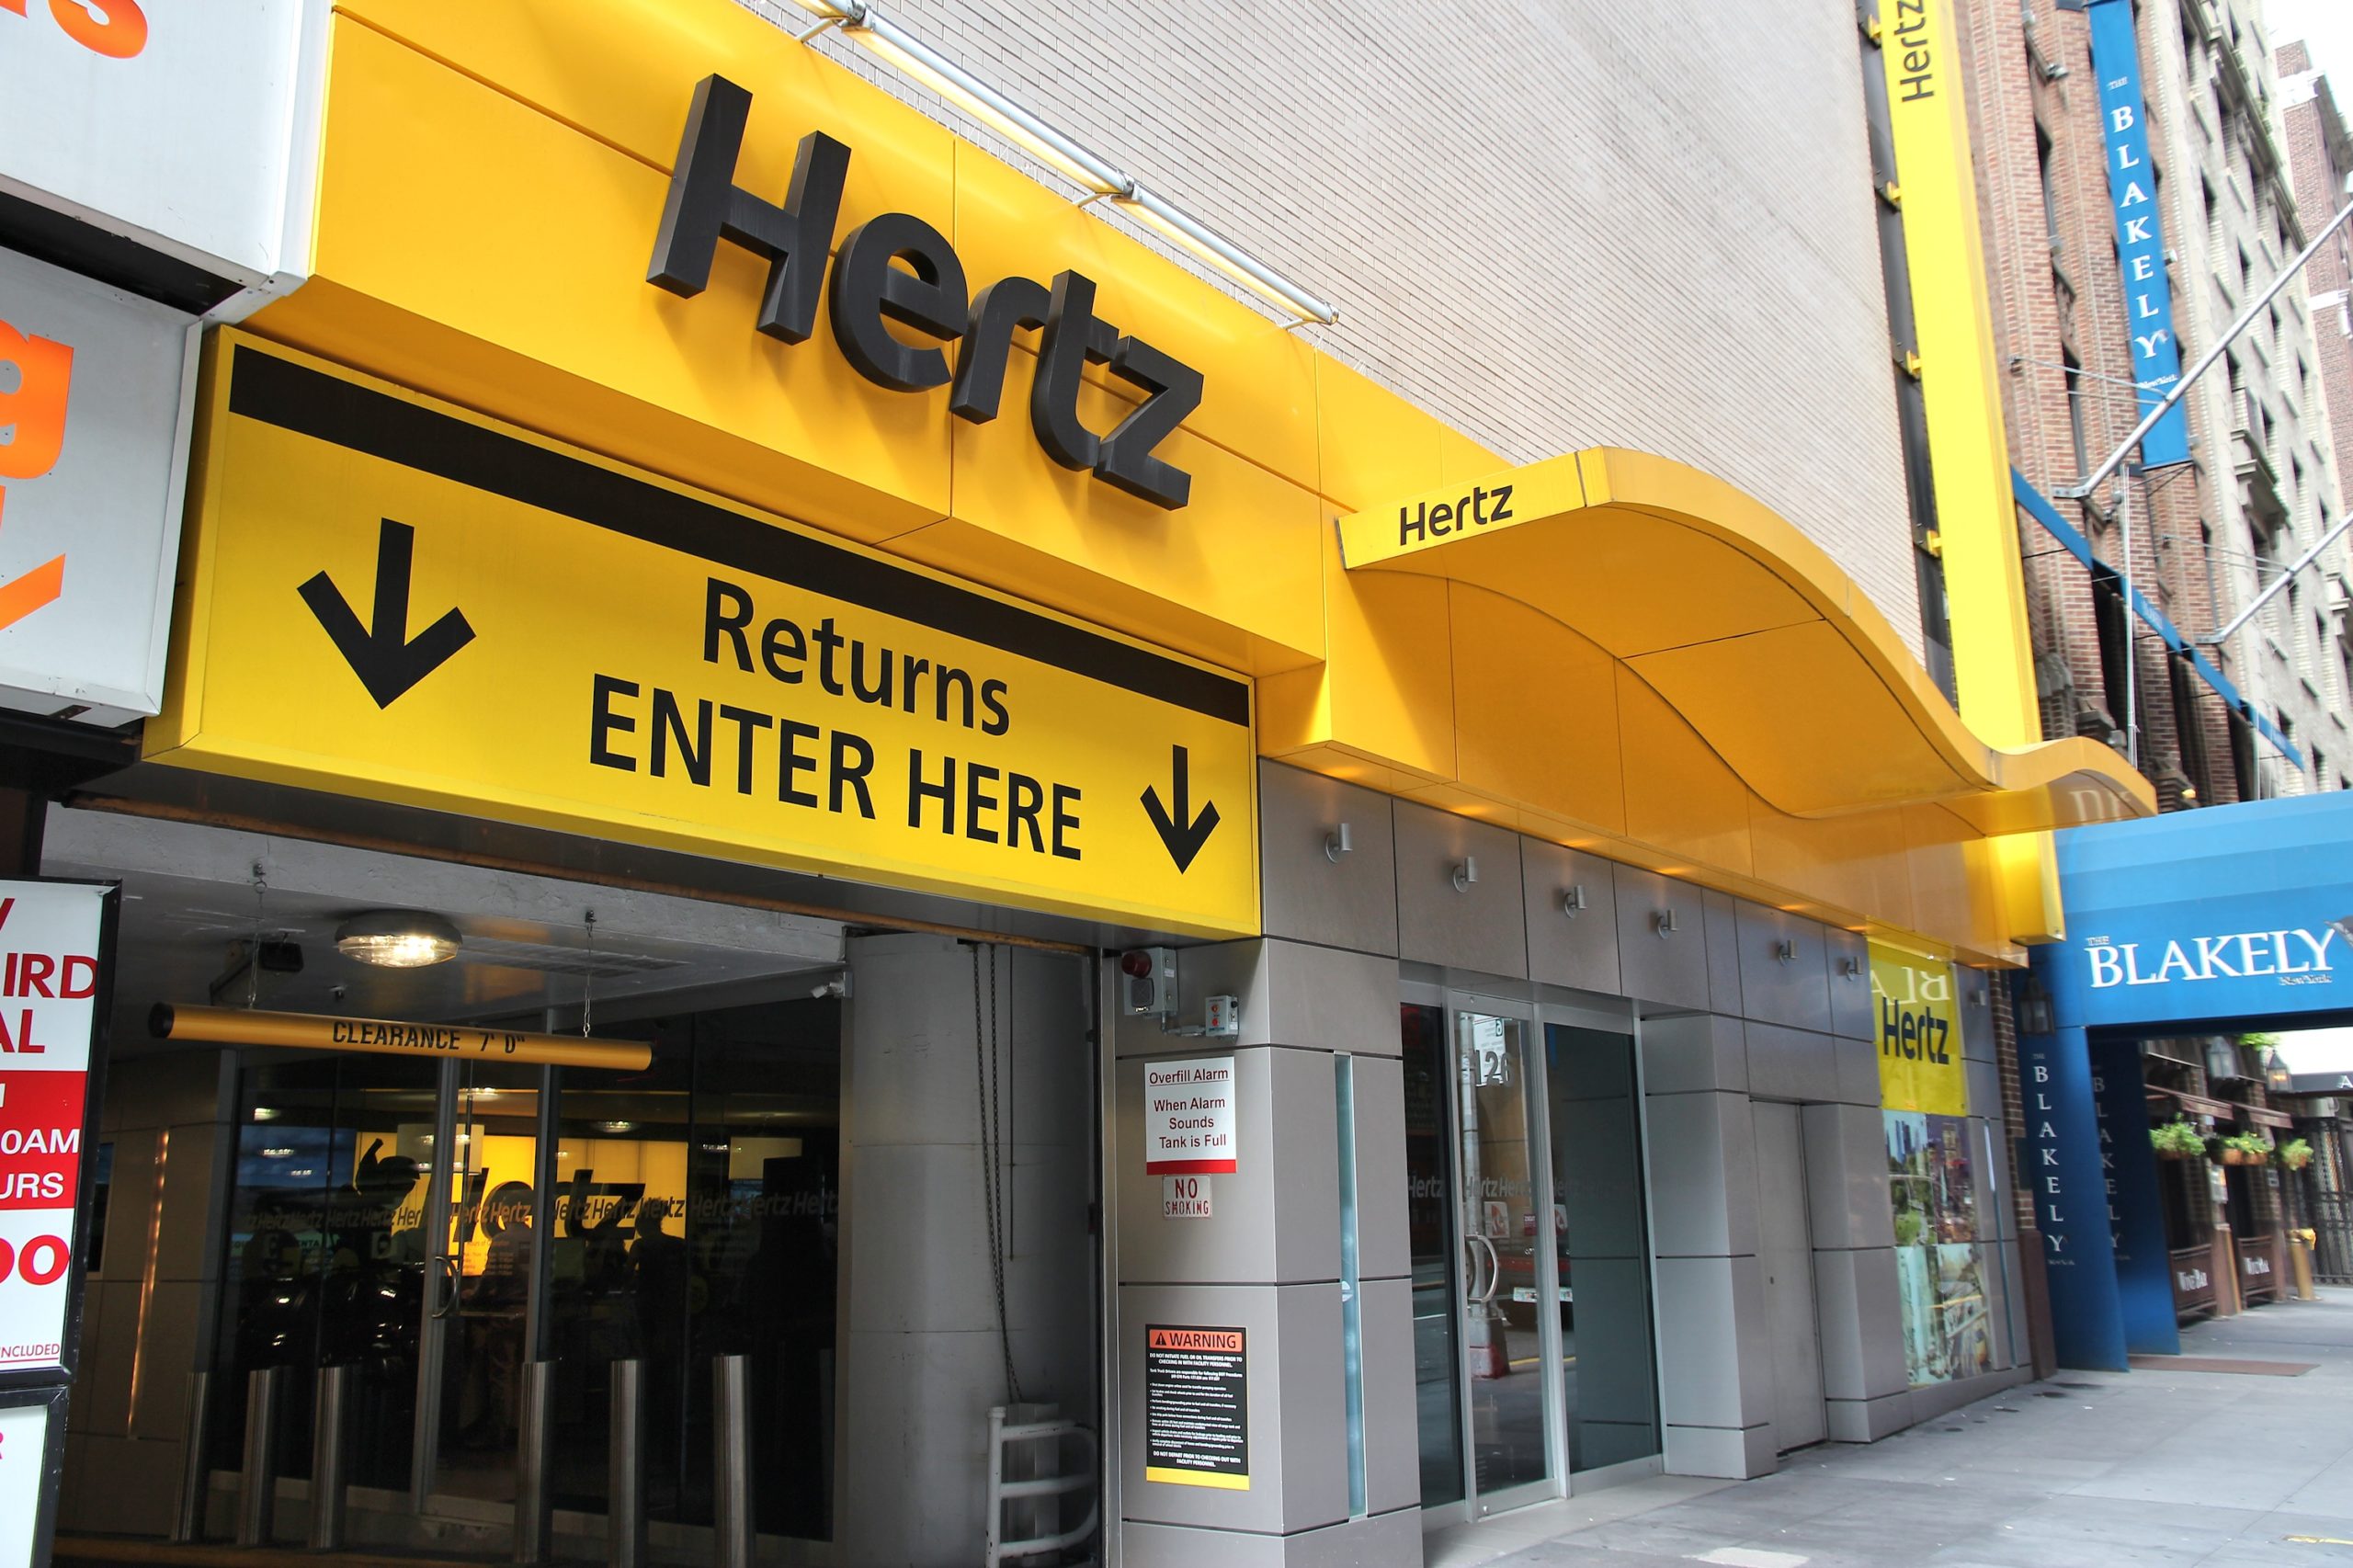 Hertz will continue operating, paying new bills after Chapter 11